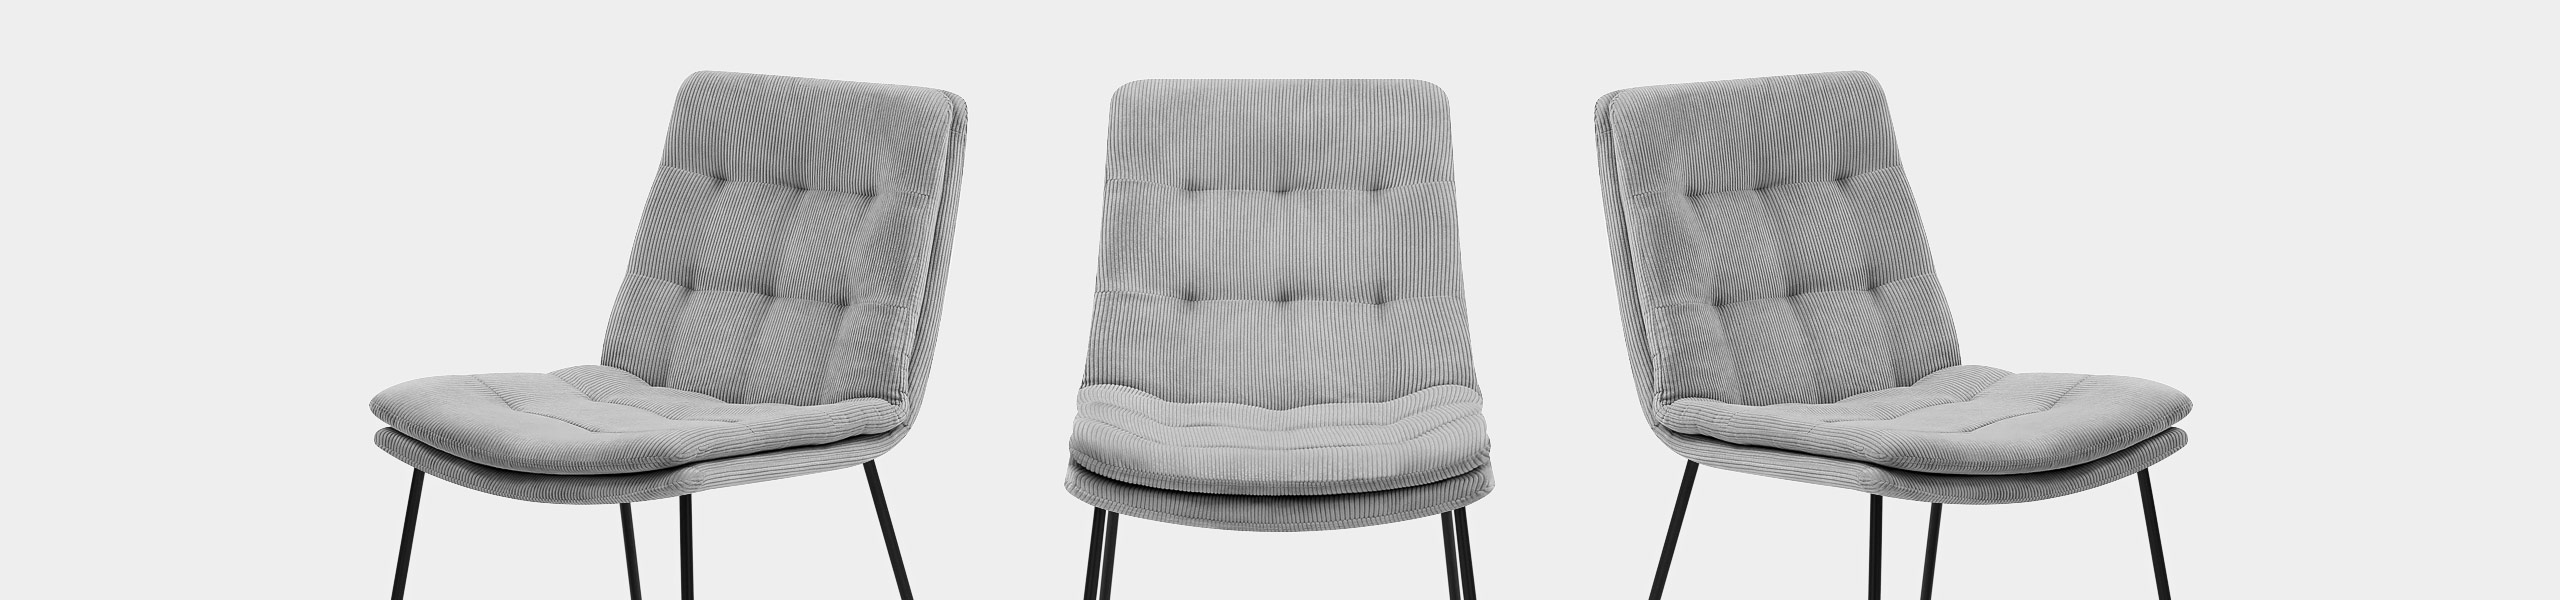 Riva Dining Chair Light Grey Fabric Video Banner